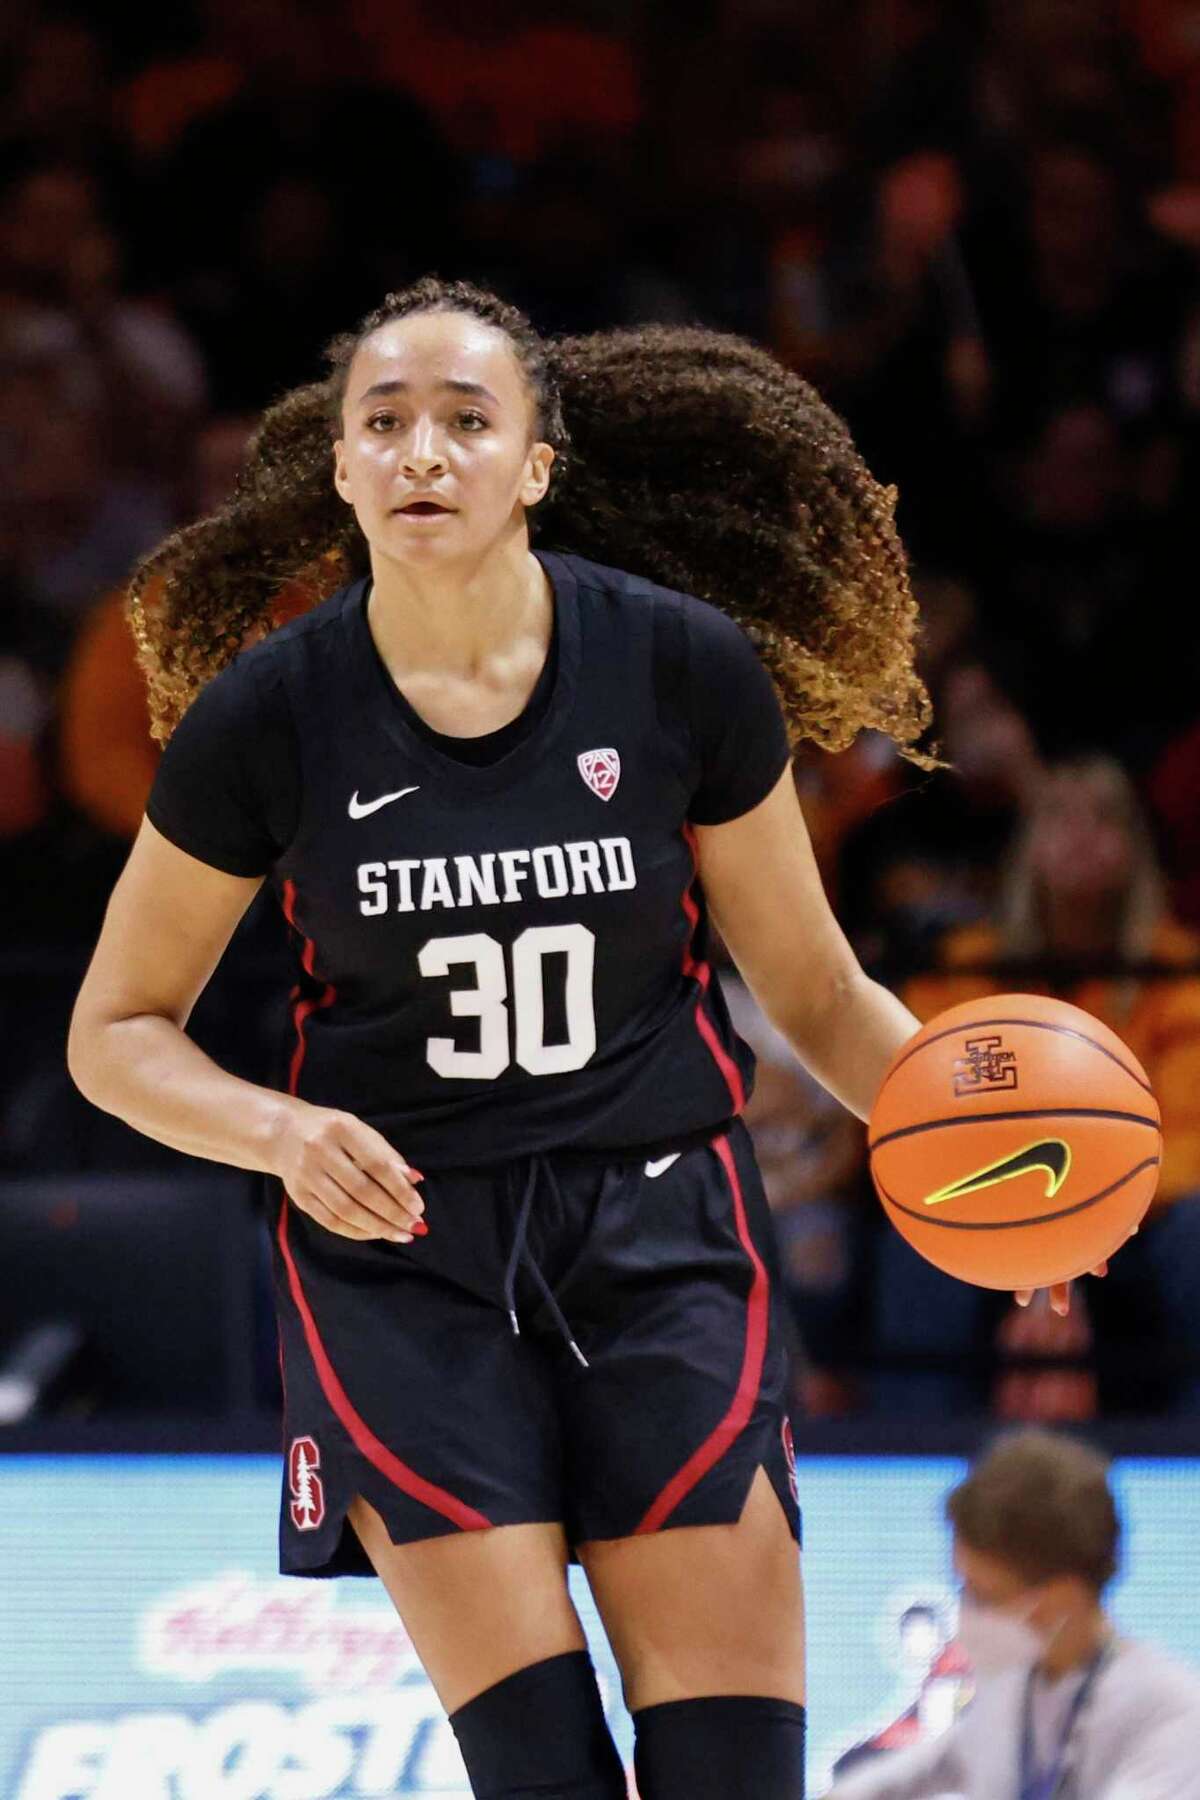 Stanford guard Haley Jones (30) brings the ball up court during the first half of an NCAA college basketball game against Tennessee Saturday, Dec. 18, 2021, in Knoxville, TN. (AP Photo/Wade Payne)